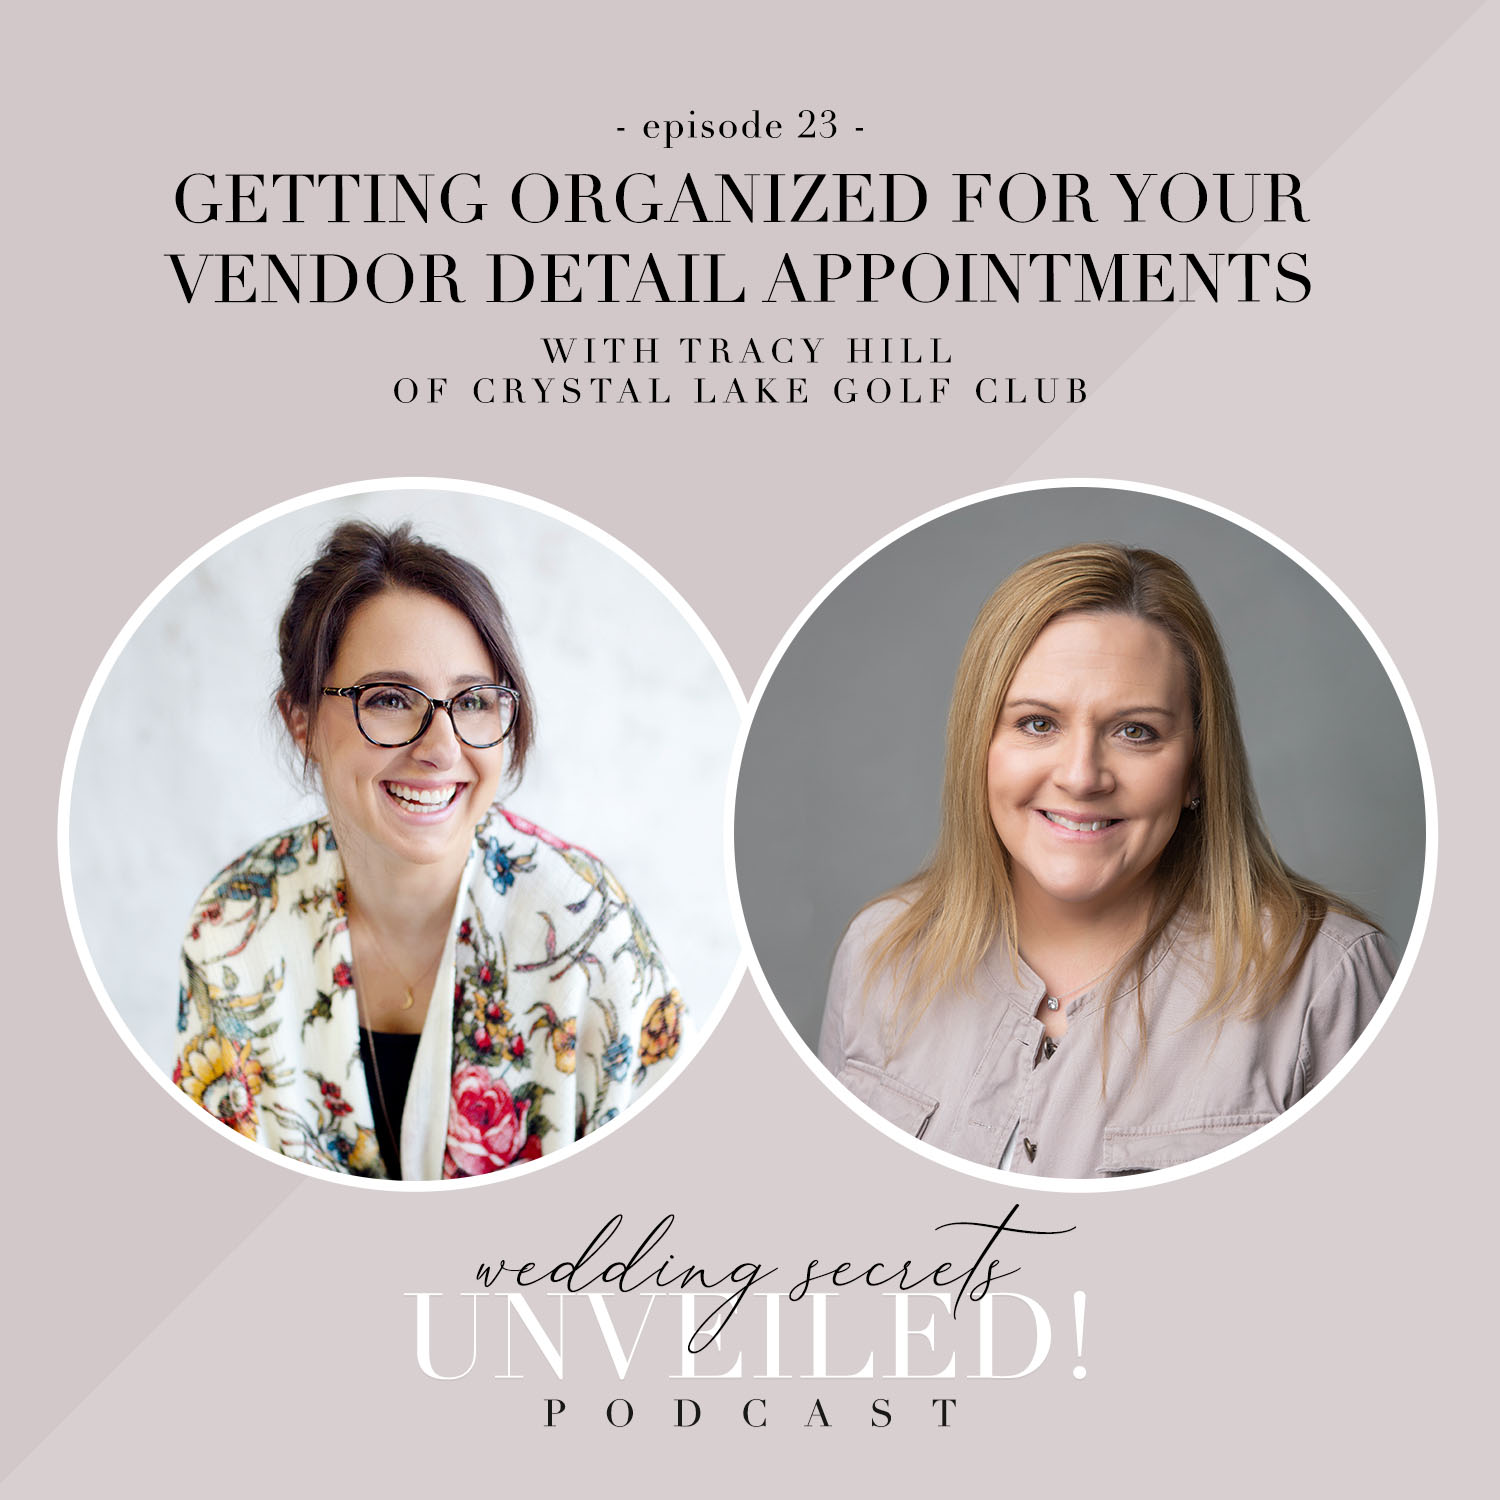 Getting Organized for Your Vendor Detail Appointments: tips from venue coordinator Tracy Hill on Wedding Secrets Unveiled! Podcast